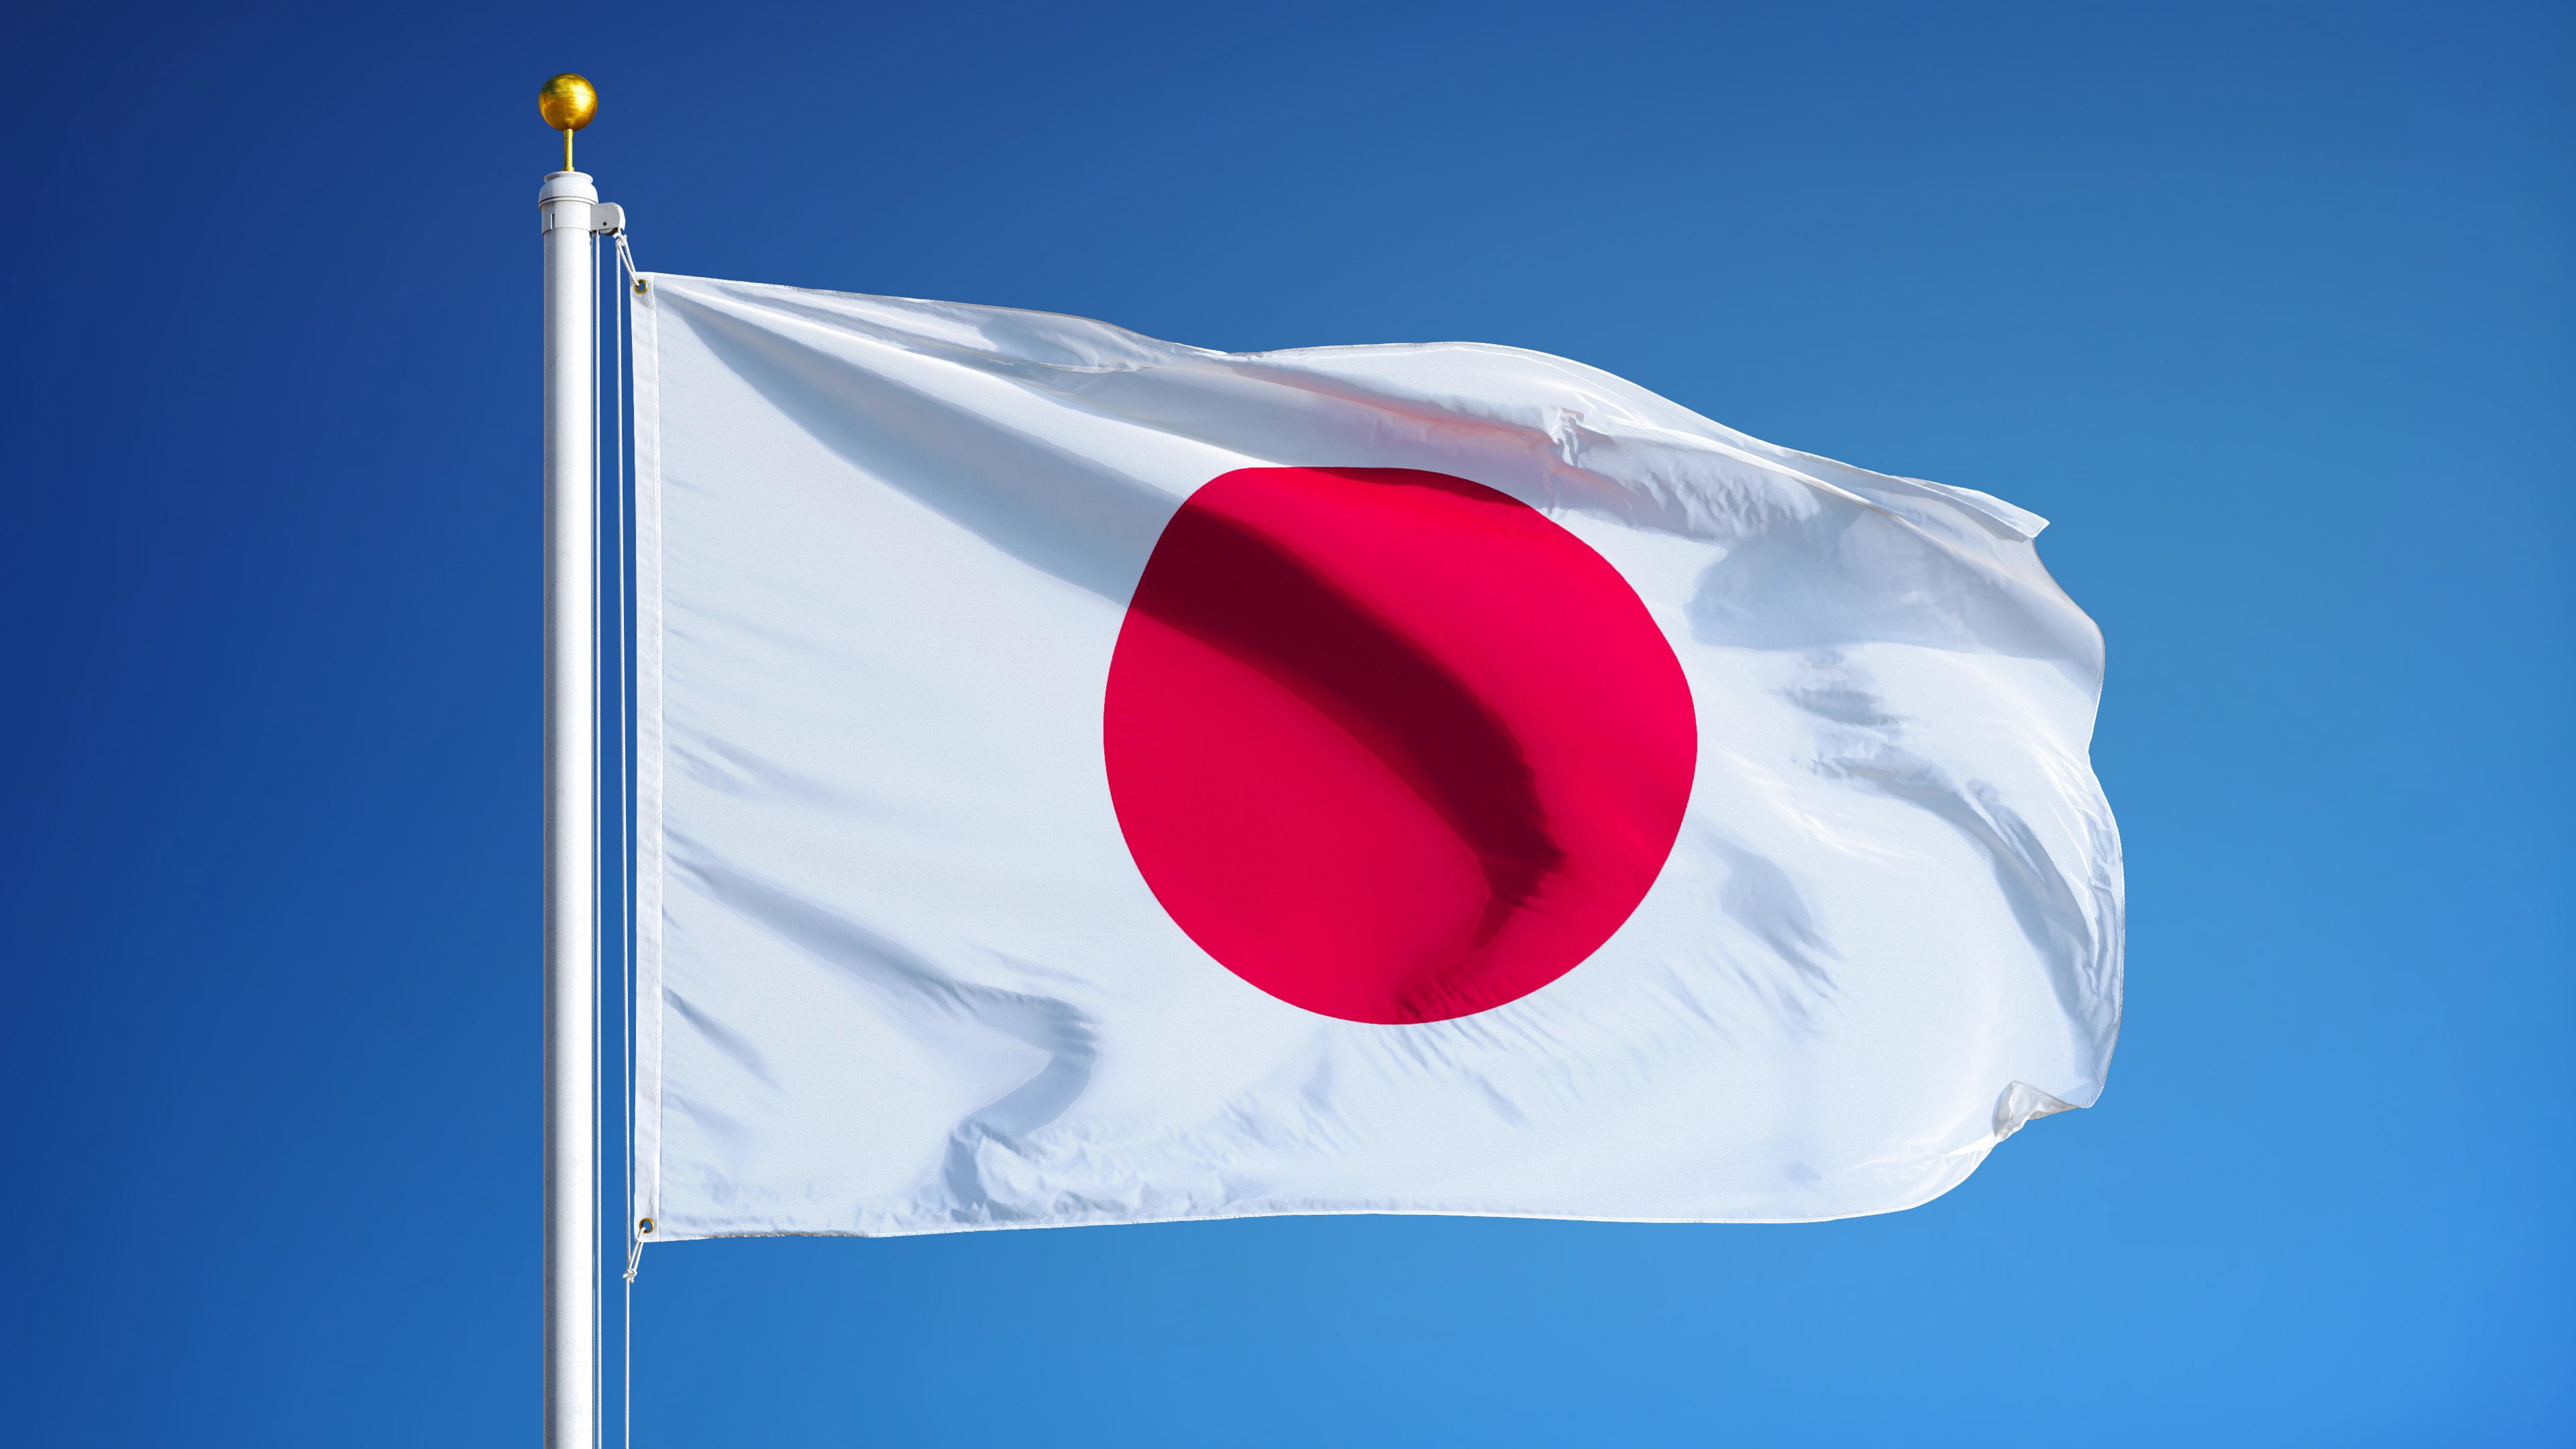 Japan’s Government to fund large carbon capture projects in the country and overseas